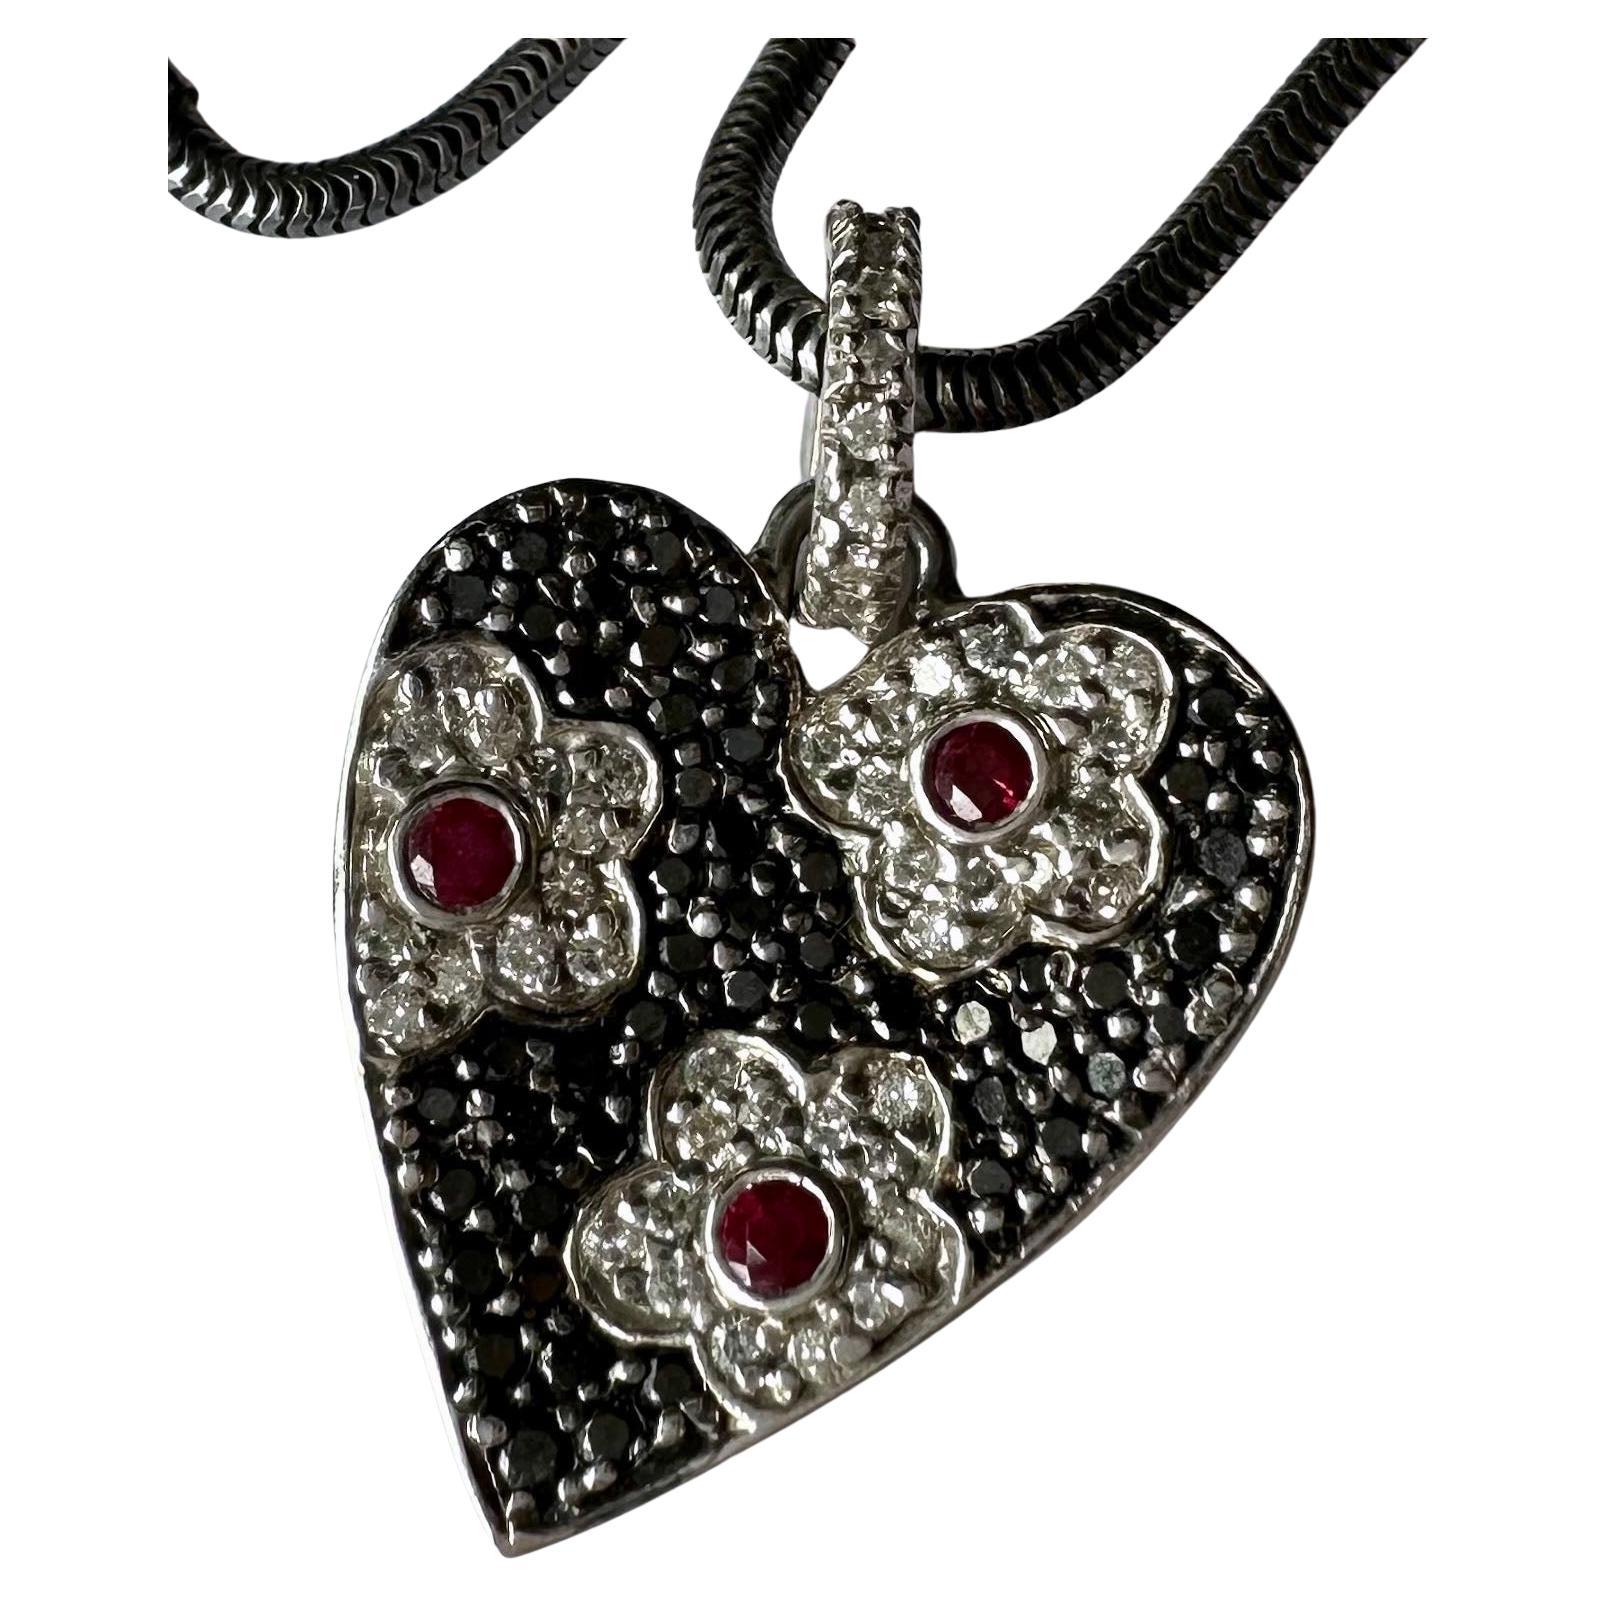 An 18kt White Gold Heart Shaped Pendant set with Rubies & Diamonds.